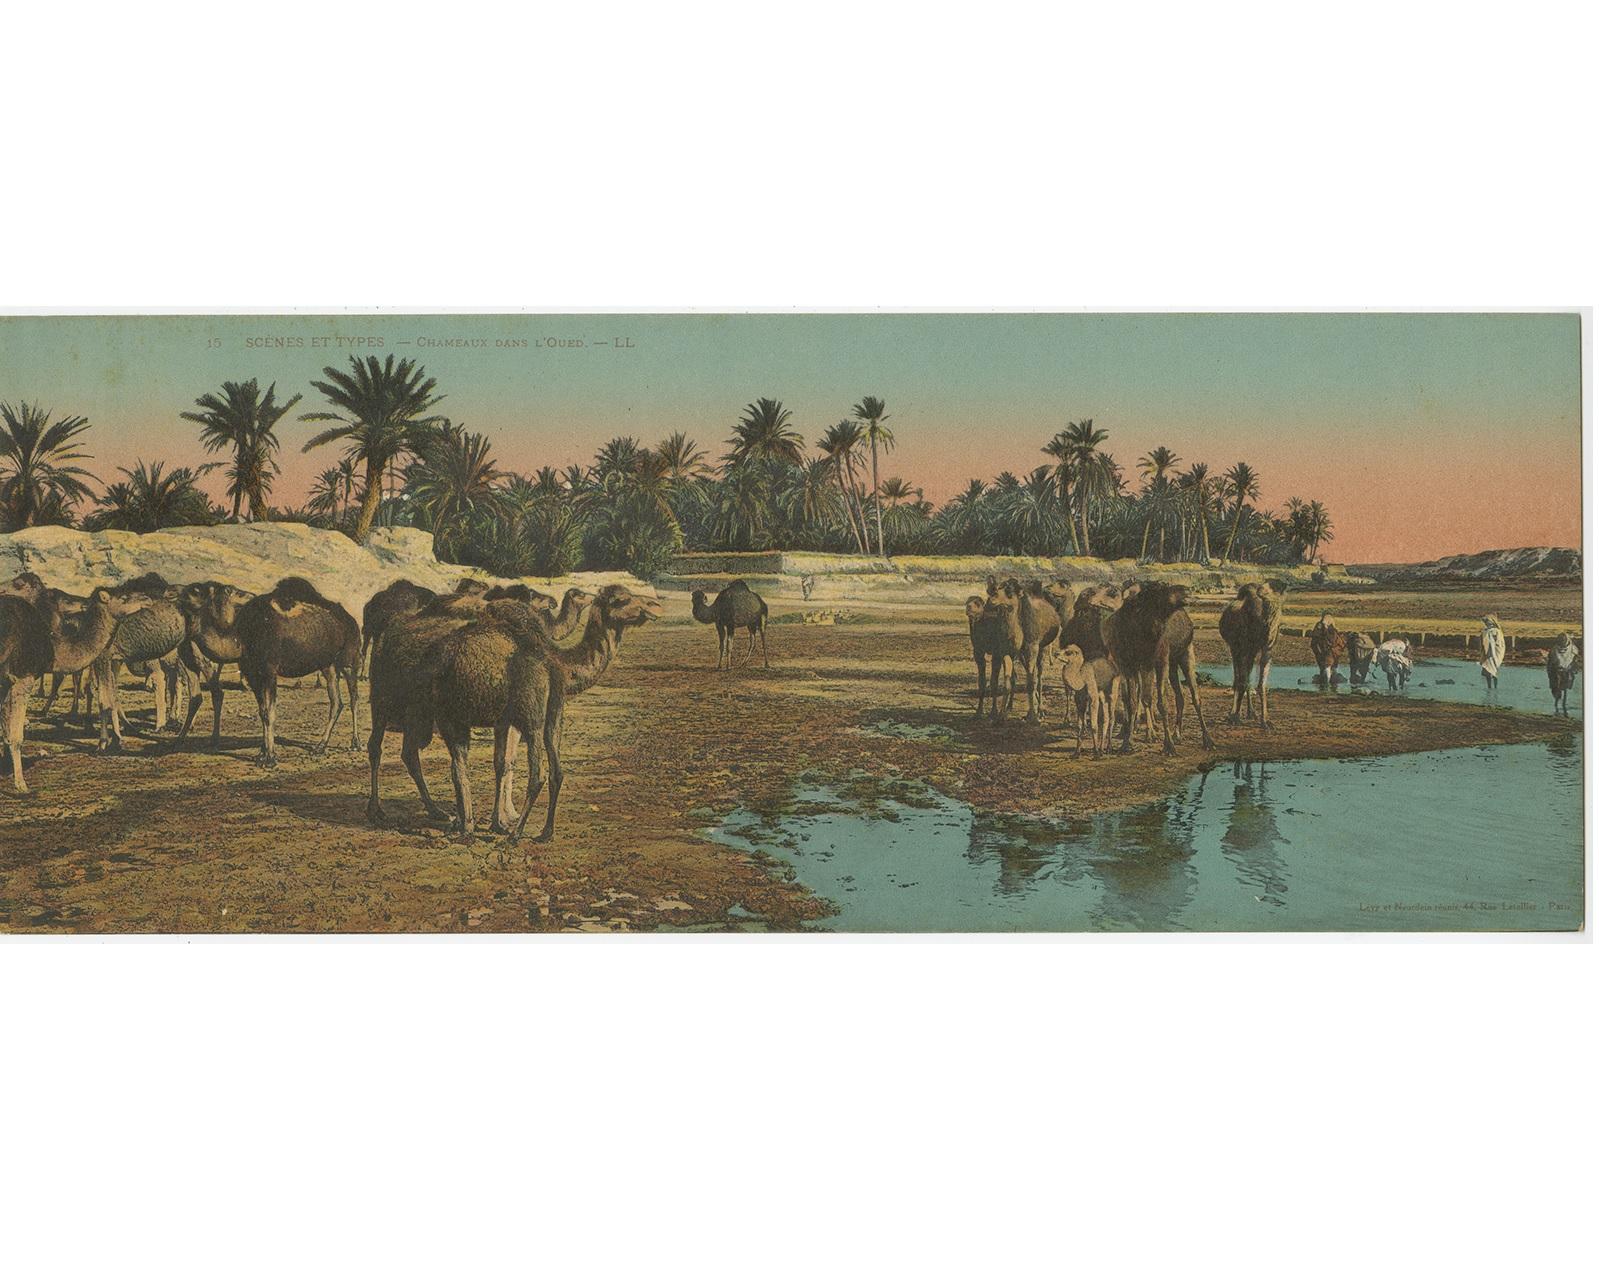 Set of three large panoramic postcards. It shows views of the deserts with people and camels. Published by Lèvy, Paris.